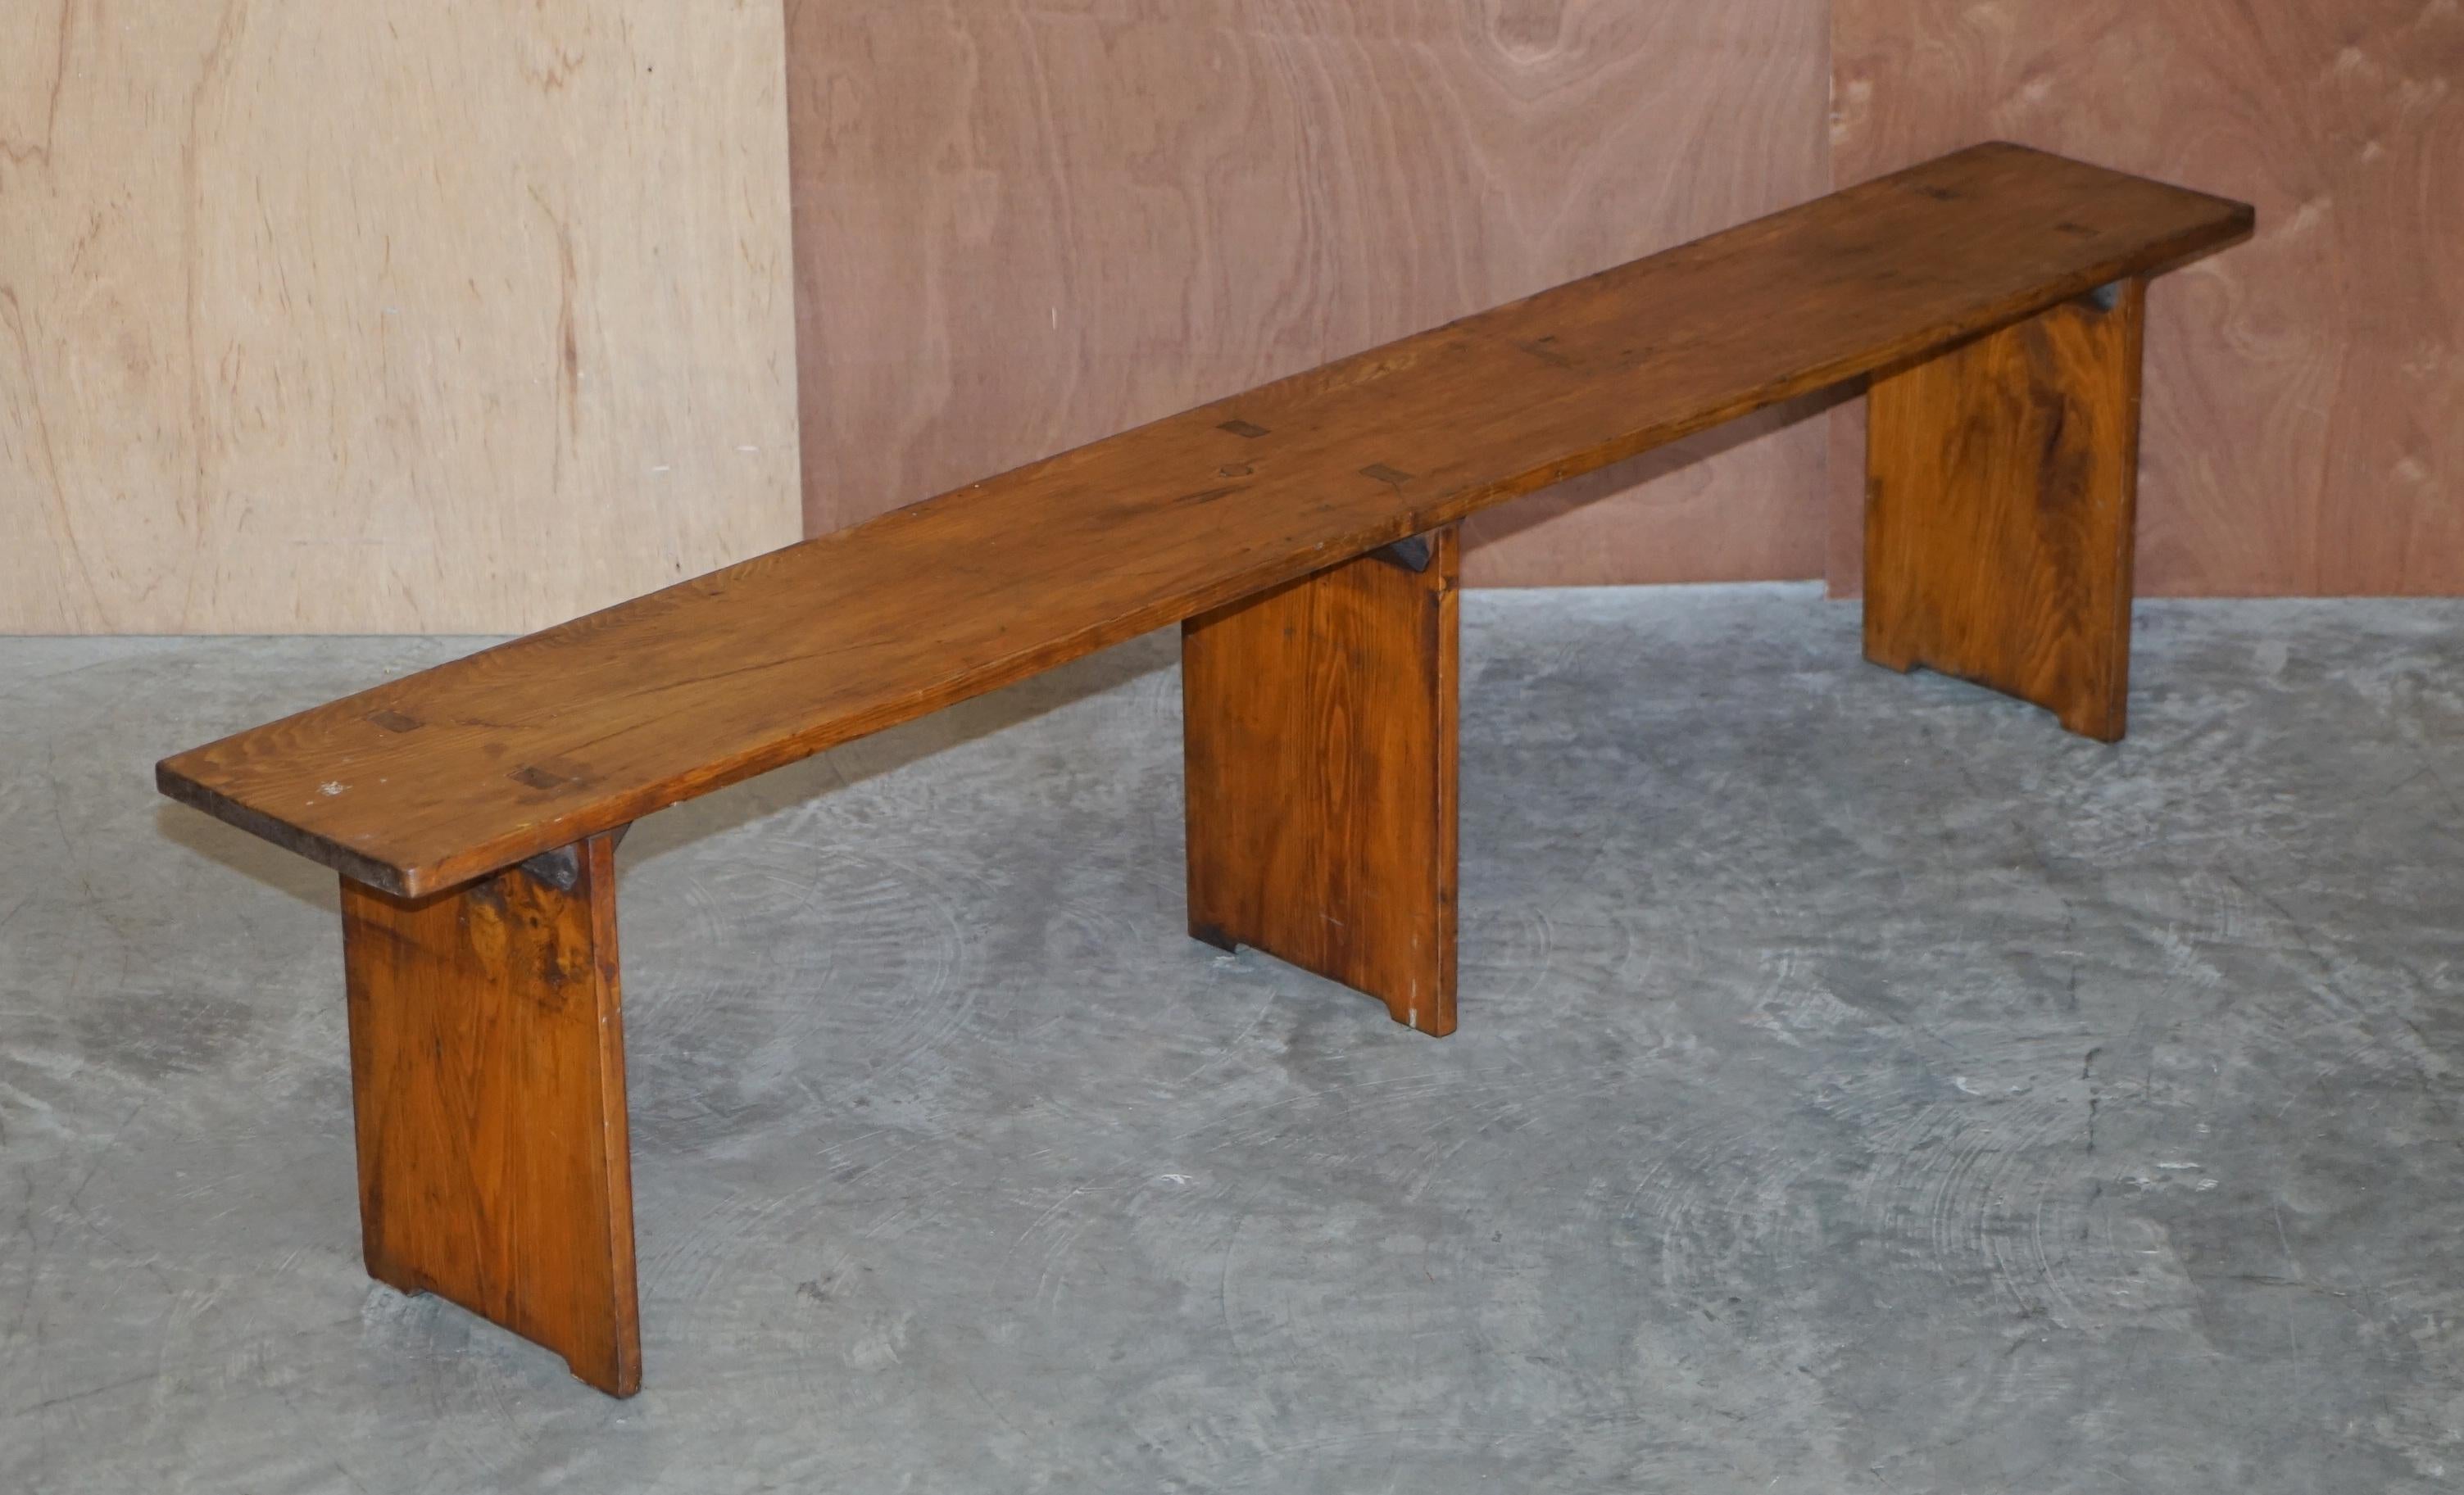 We are delighted to offer this stunning pair of vintage pitch pine benches for a refectory dining table with original finish

Please note the delivery fee listed is just a guide, it covers within the M25 only for the UK and local Europe only for